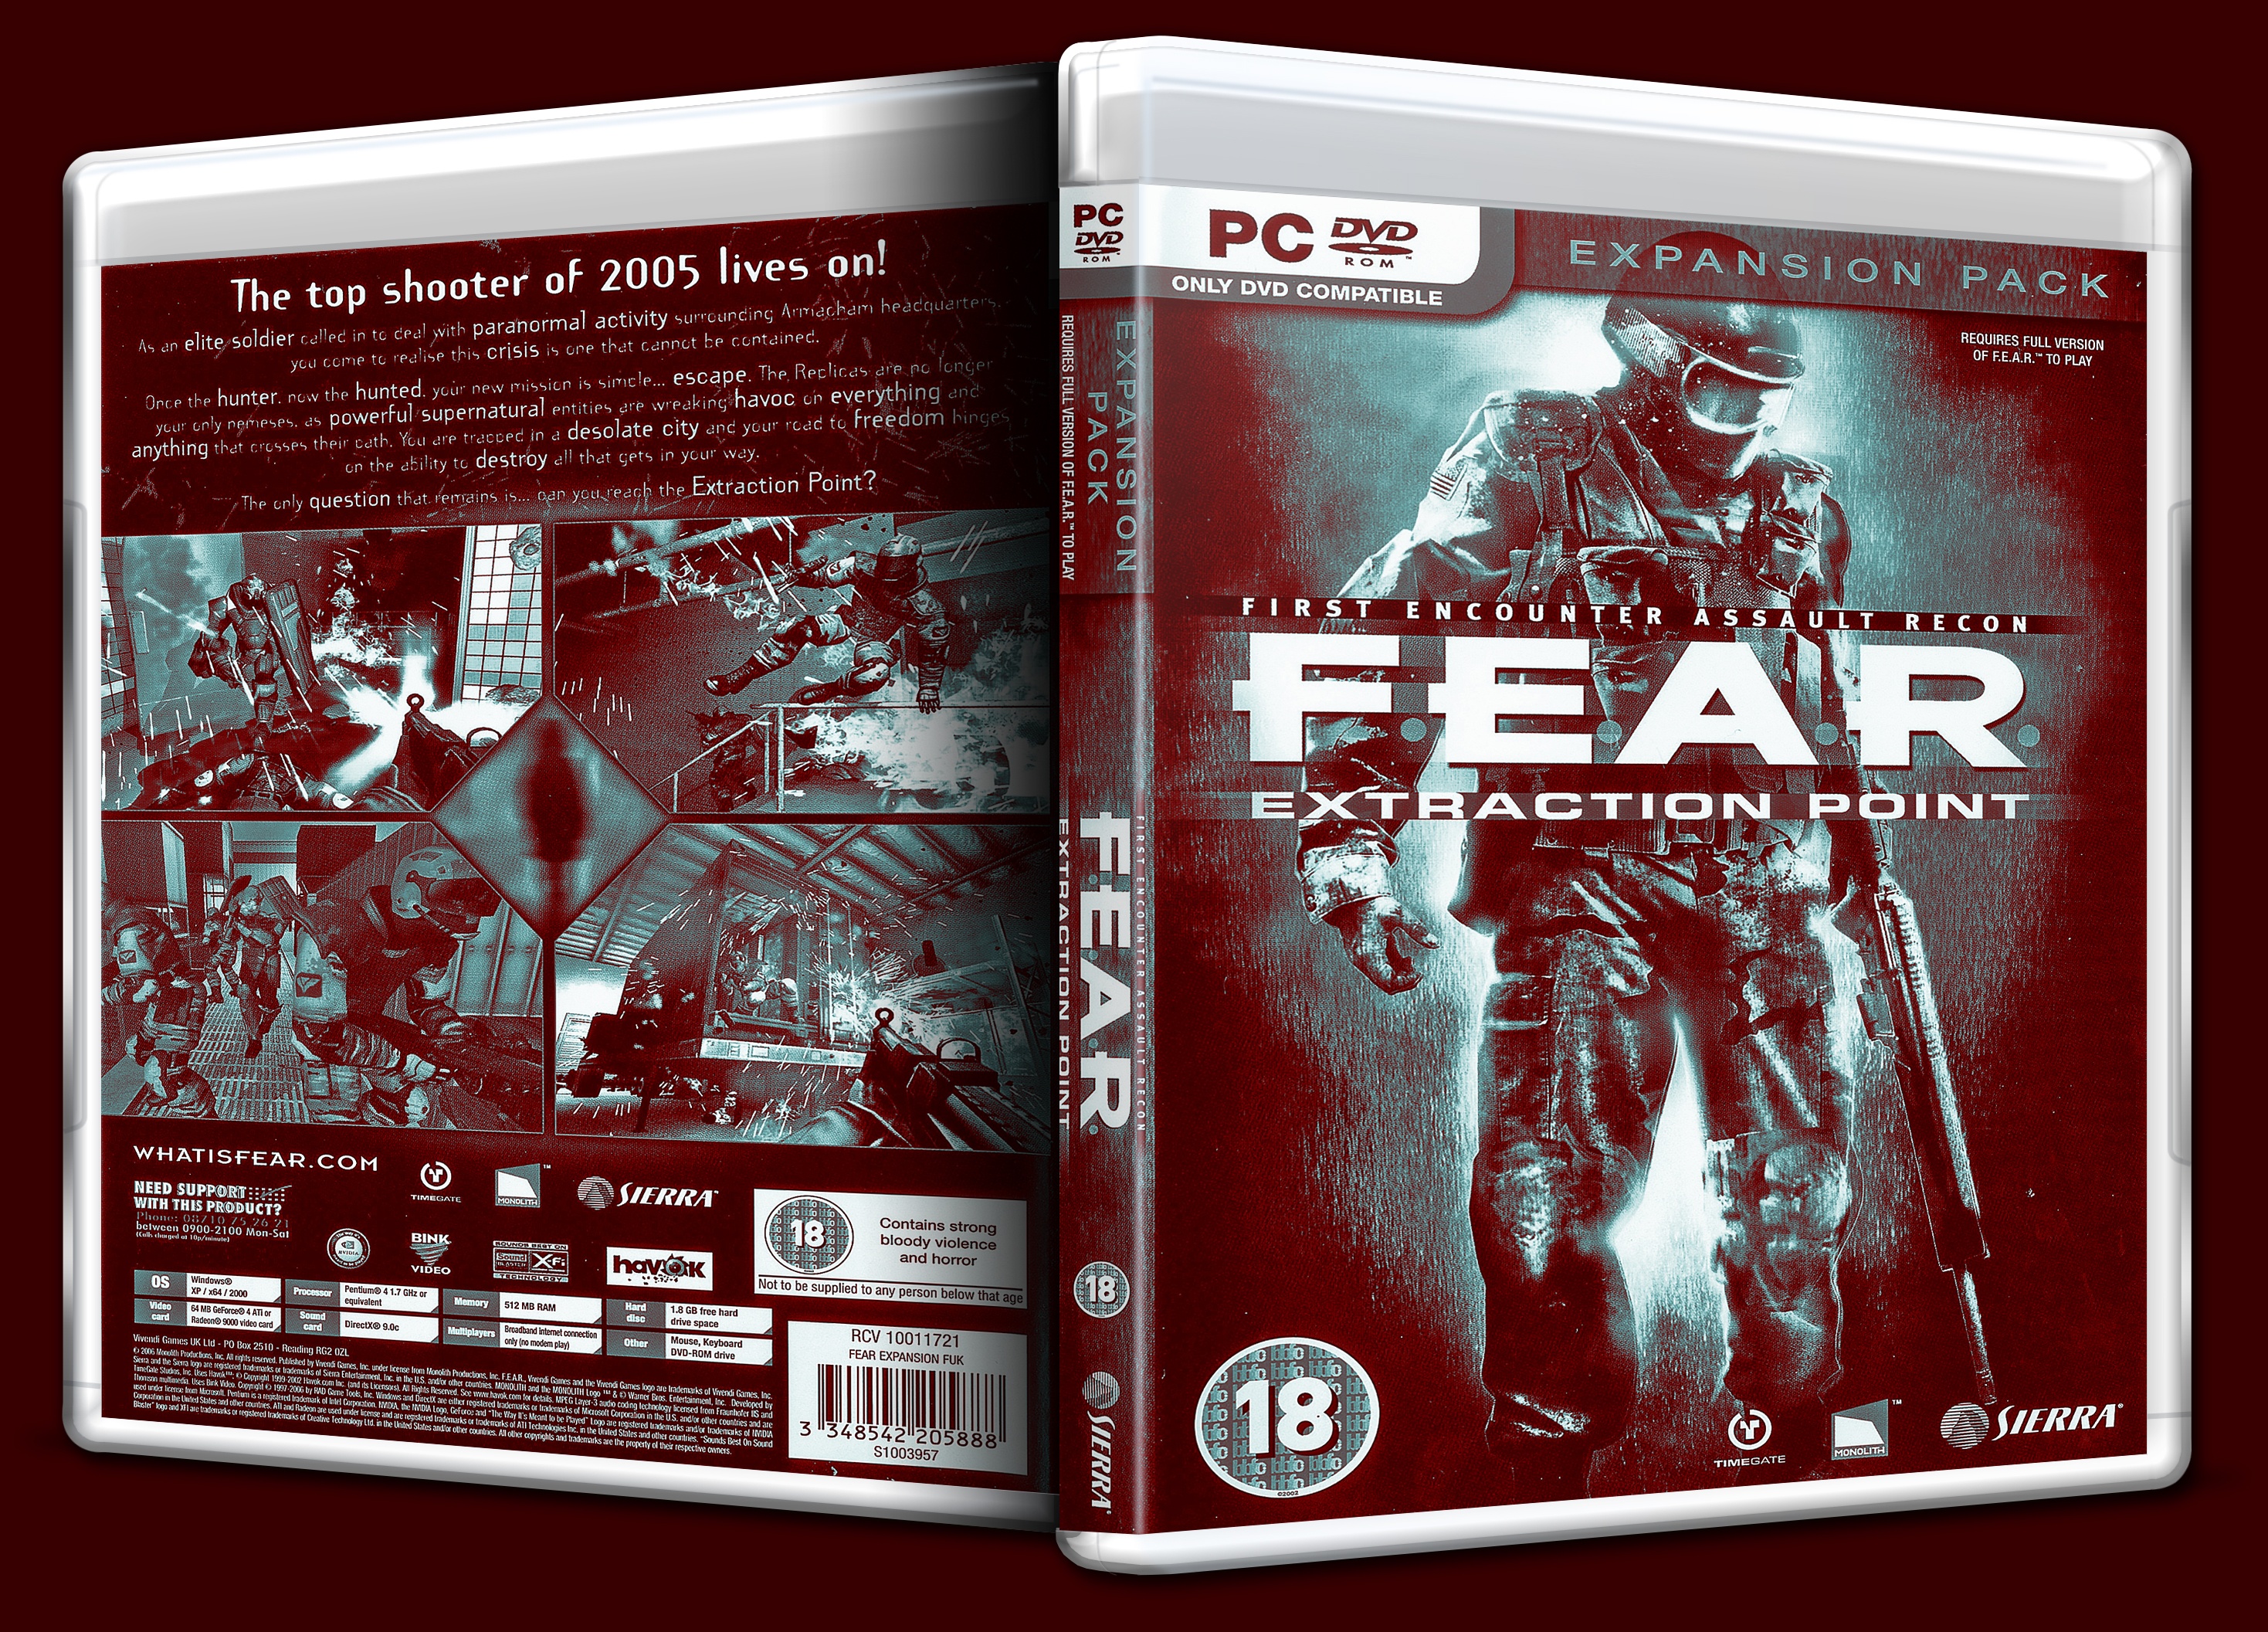 F. E. A. R. Extraction Point box cover